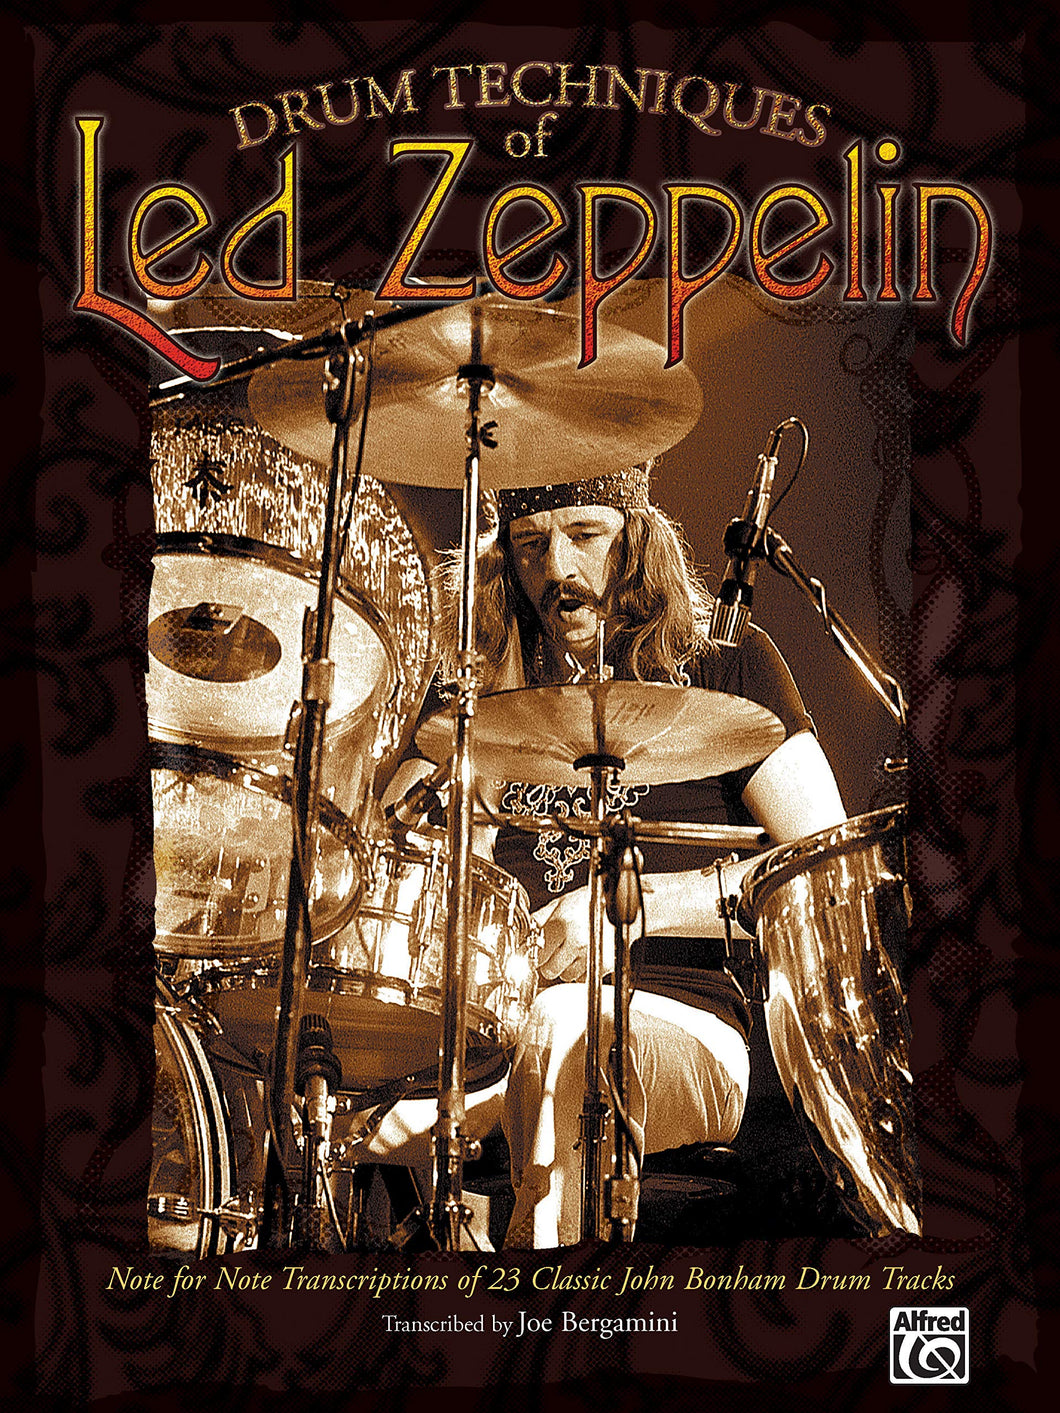 Dazed and Confused - Led Zeppelin - Collection of Drum Transcriptions / Drum Sheet Music - Alfred Music DTLZNFNT